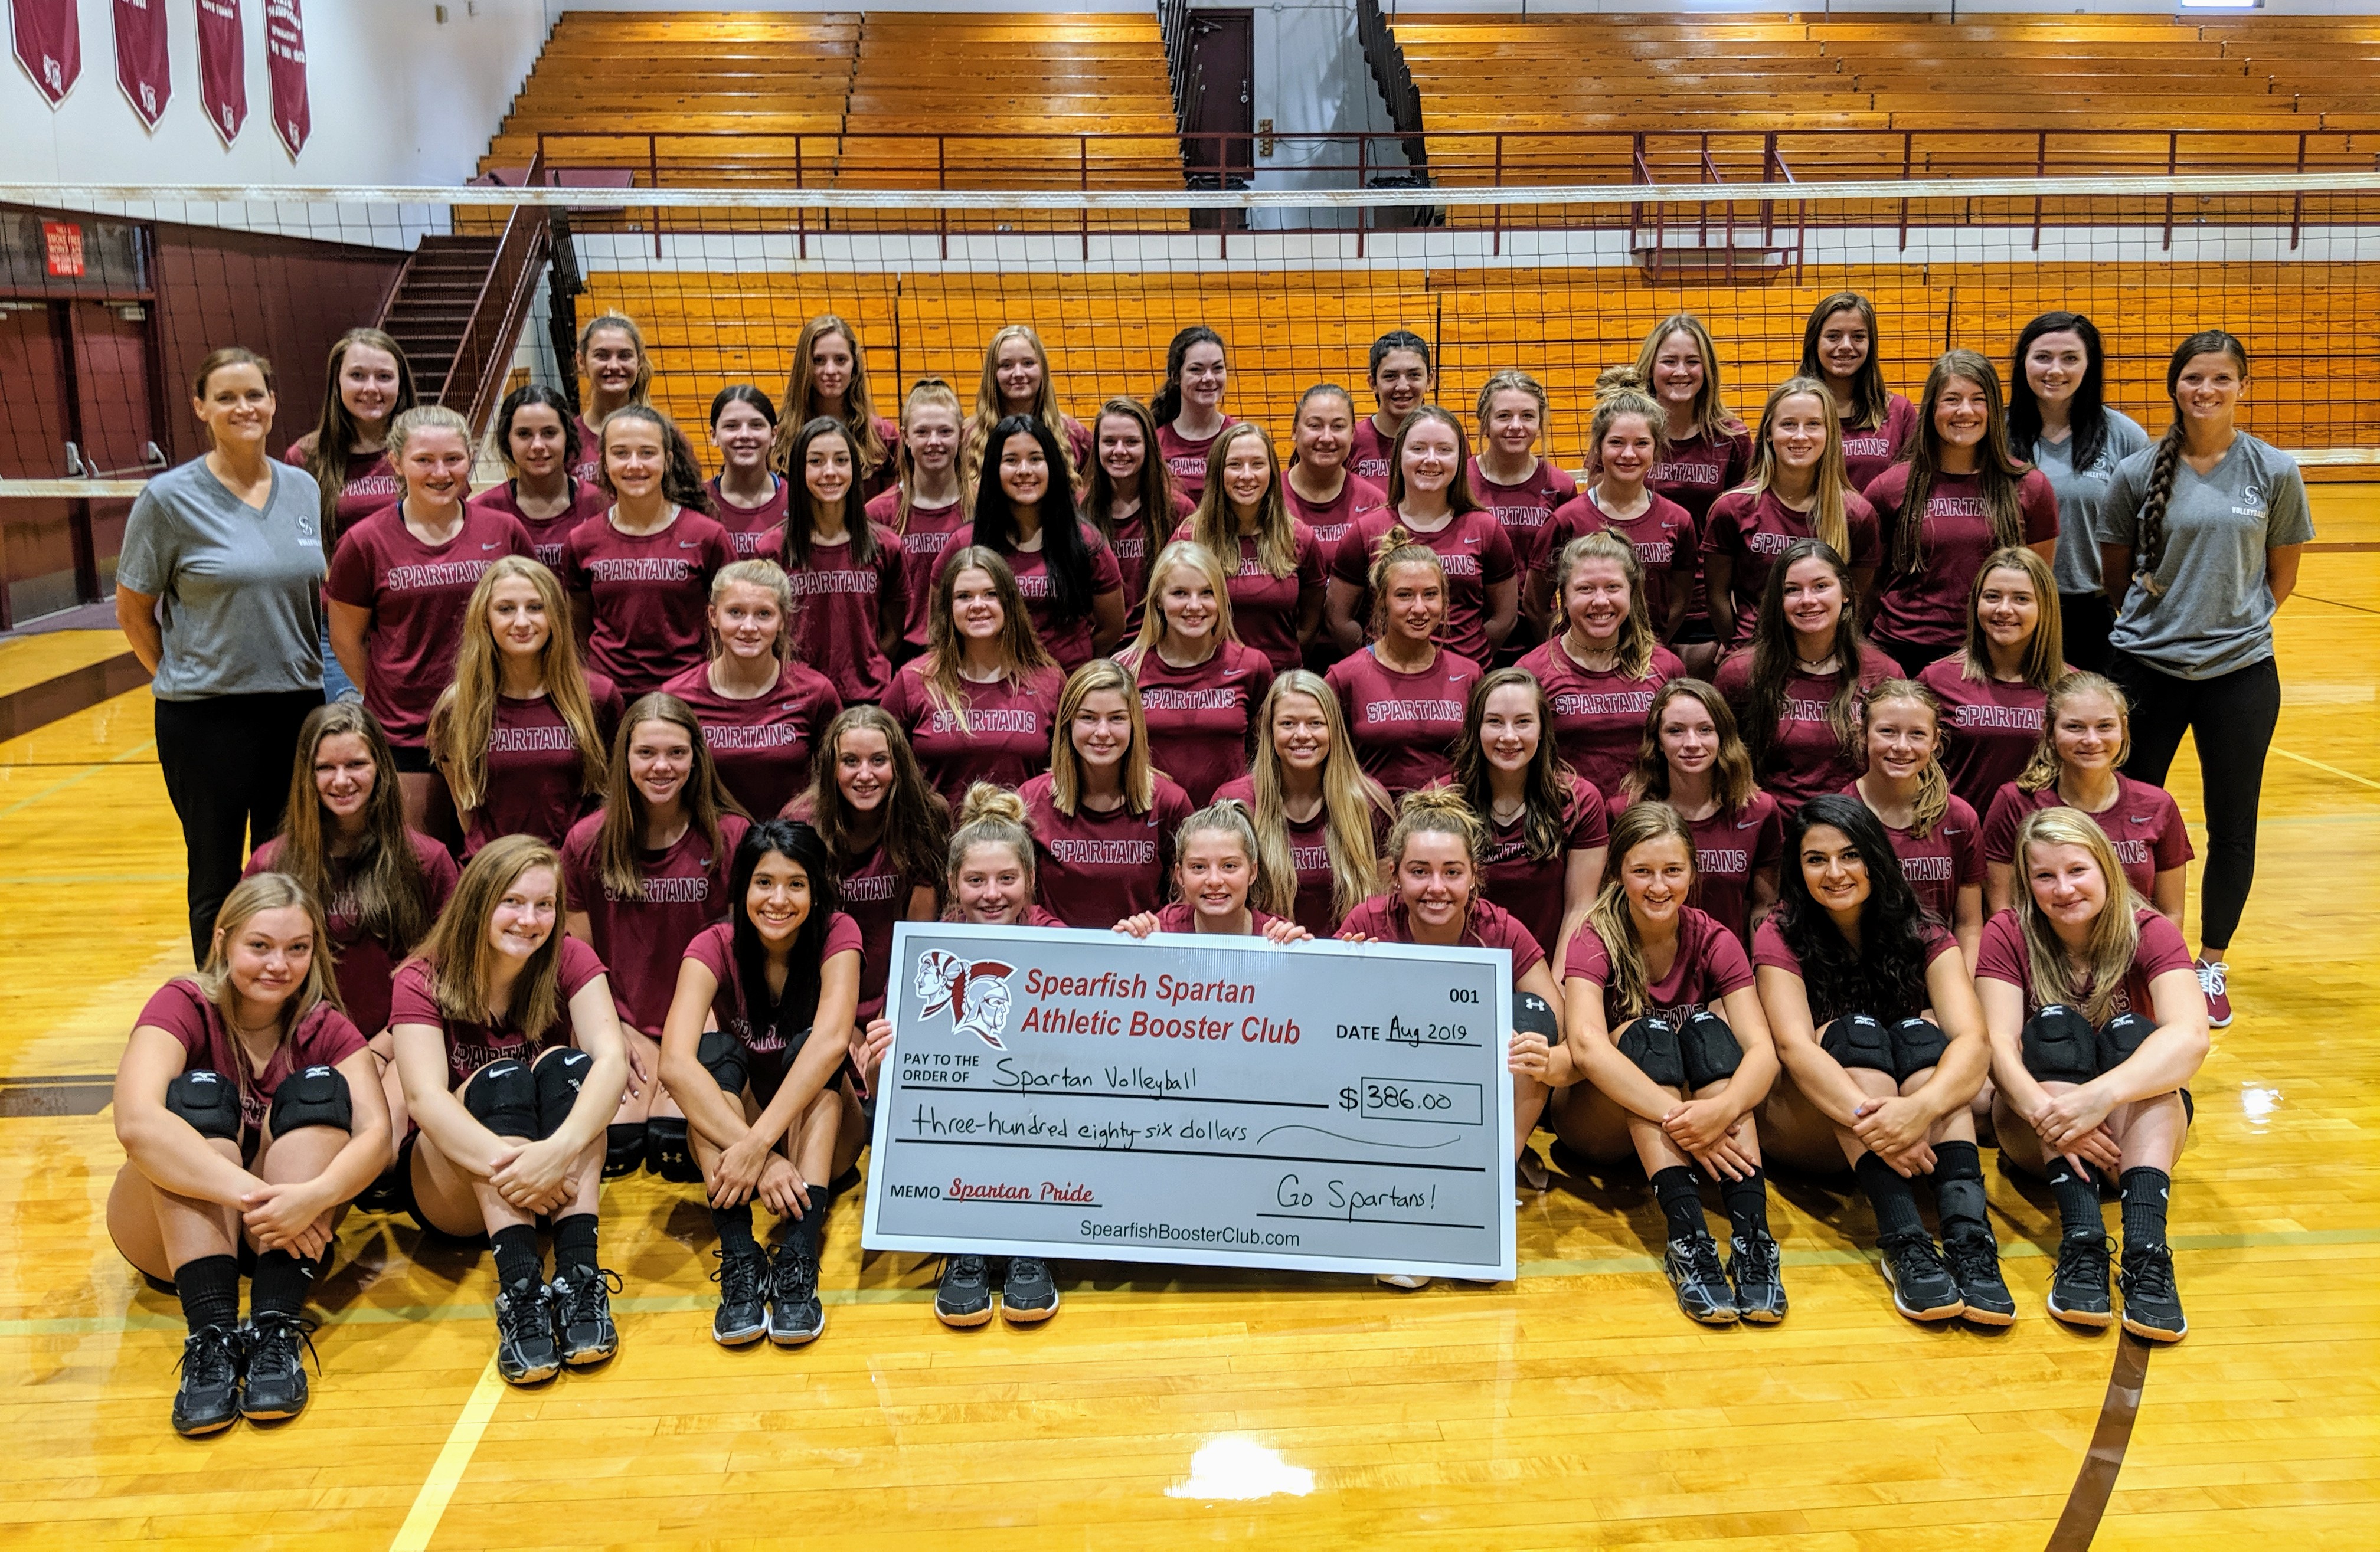 The Spearfish Spartan Athletic Booster Club presented funding to the Spearfish Spartan Volleyball Team to purchase an iPad and accessories. They will use the equipment to record practices and matches to help improve their game.     The Booster Club is pleased to support the Volleyball team to reach their full potential this season!